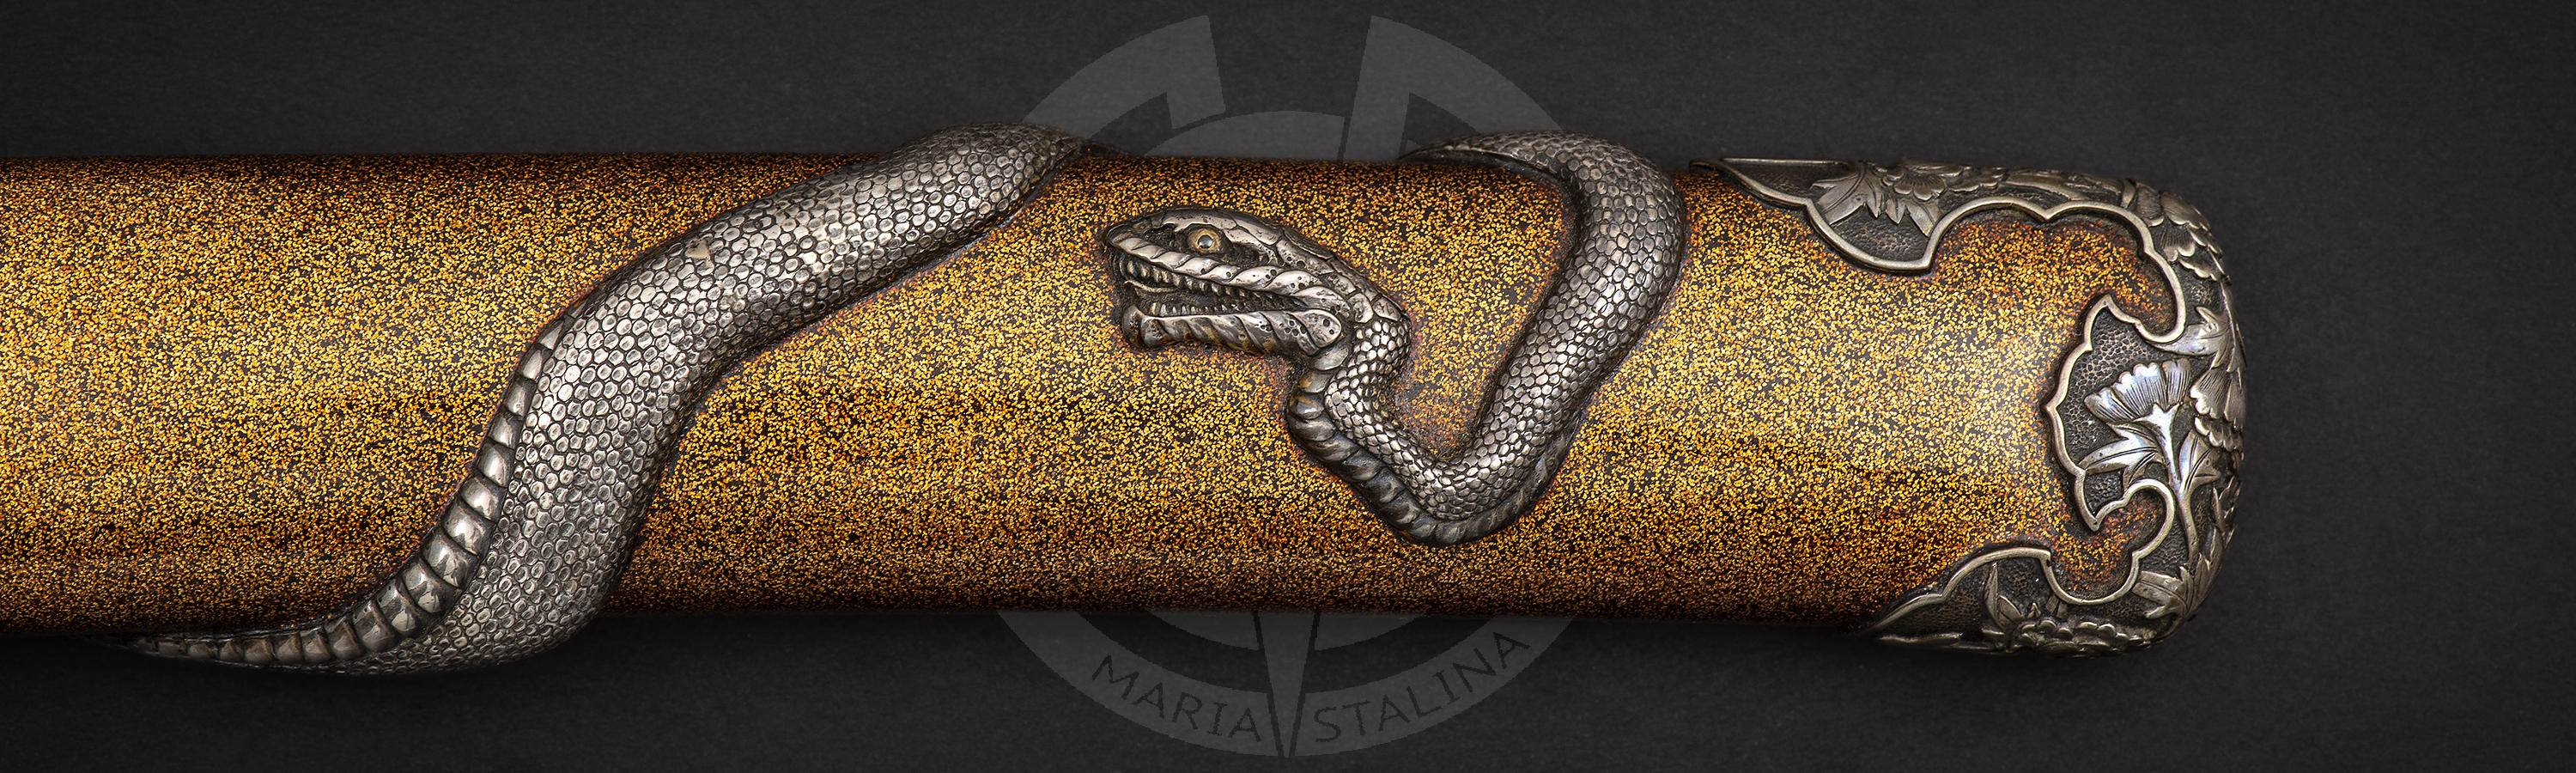 The snake wraps around the surface of the lacquer scabbard